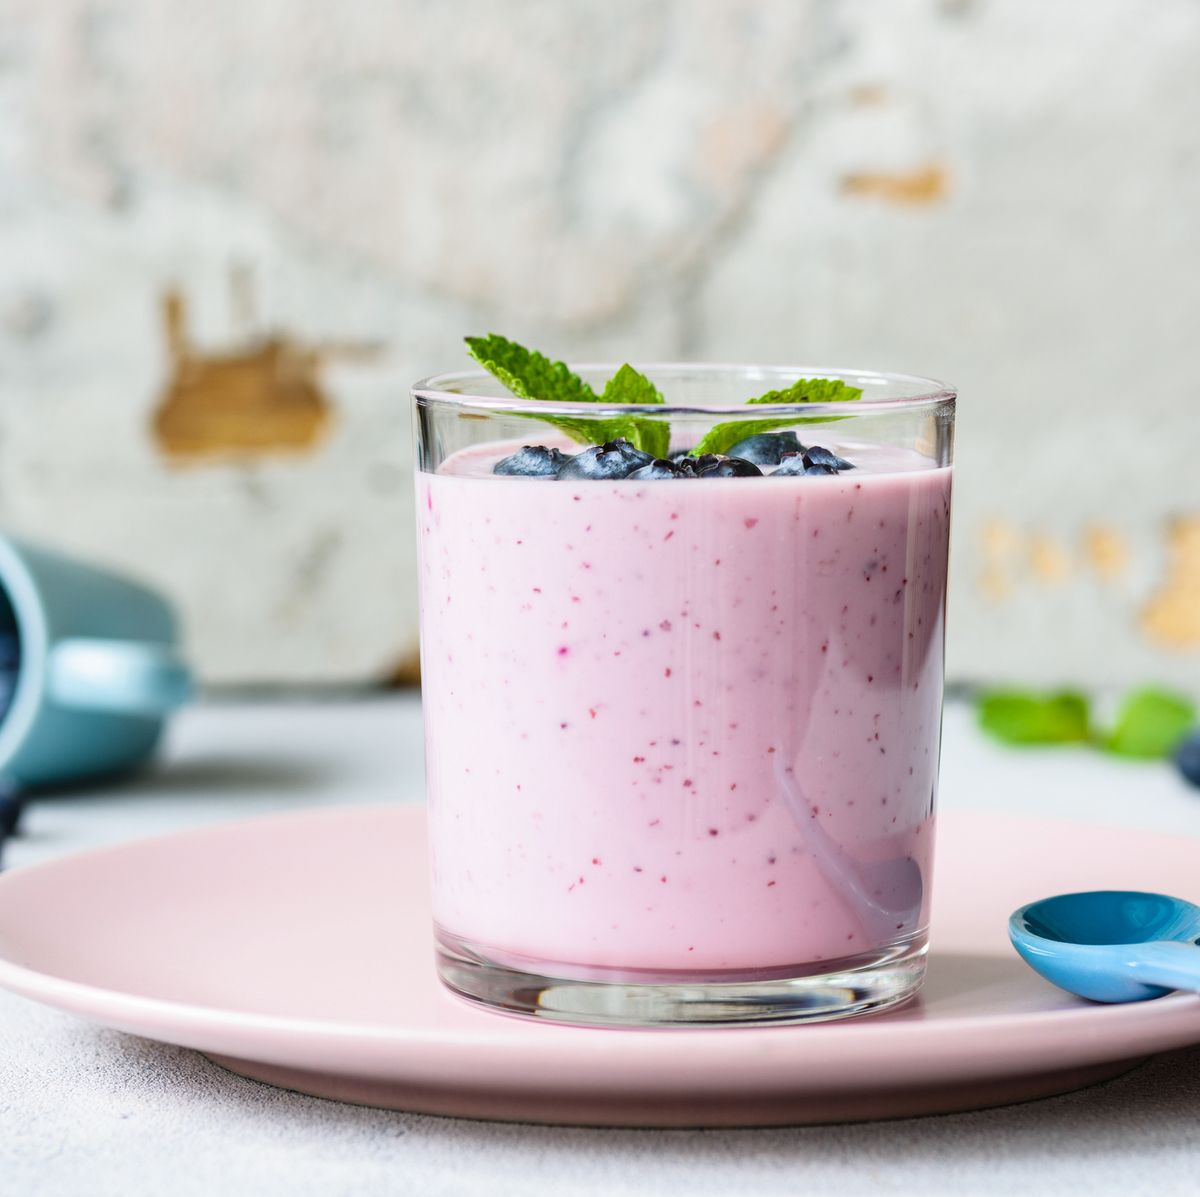 40 Best Healthy Smoothie Recipes For Weight Loss, From Dietitians